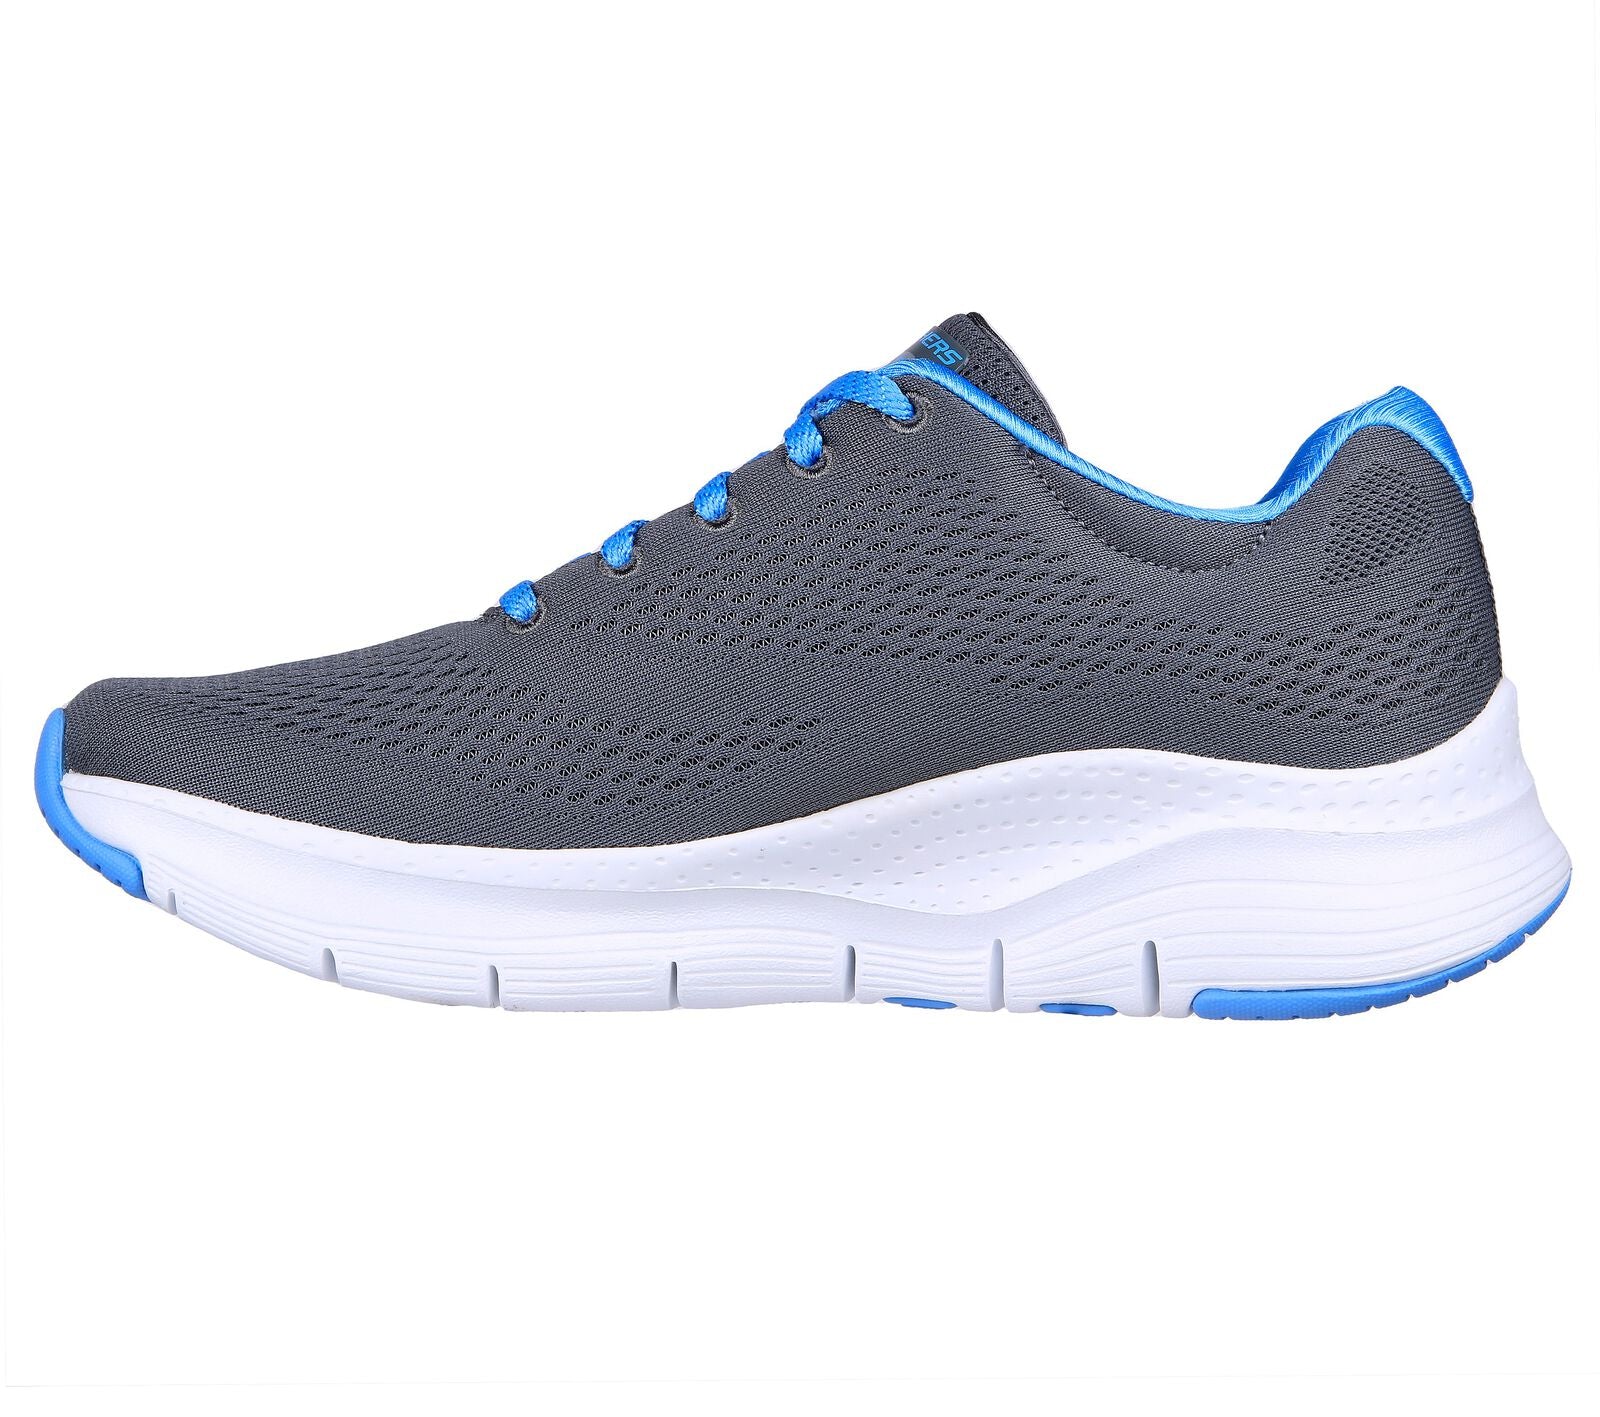 Skechers 149057 Arch Fit Big Appeal Ladies Charcoal And Blue Textile Arch Support Lace Up Trainers